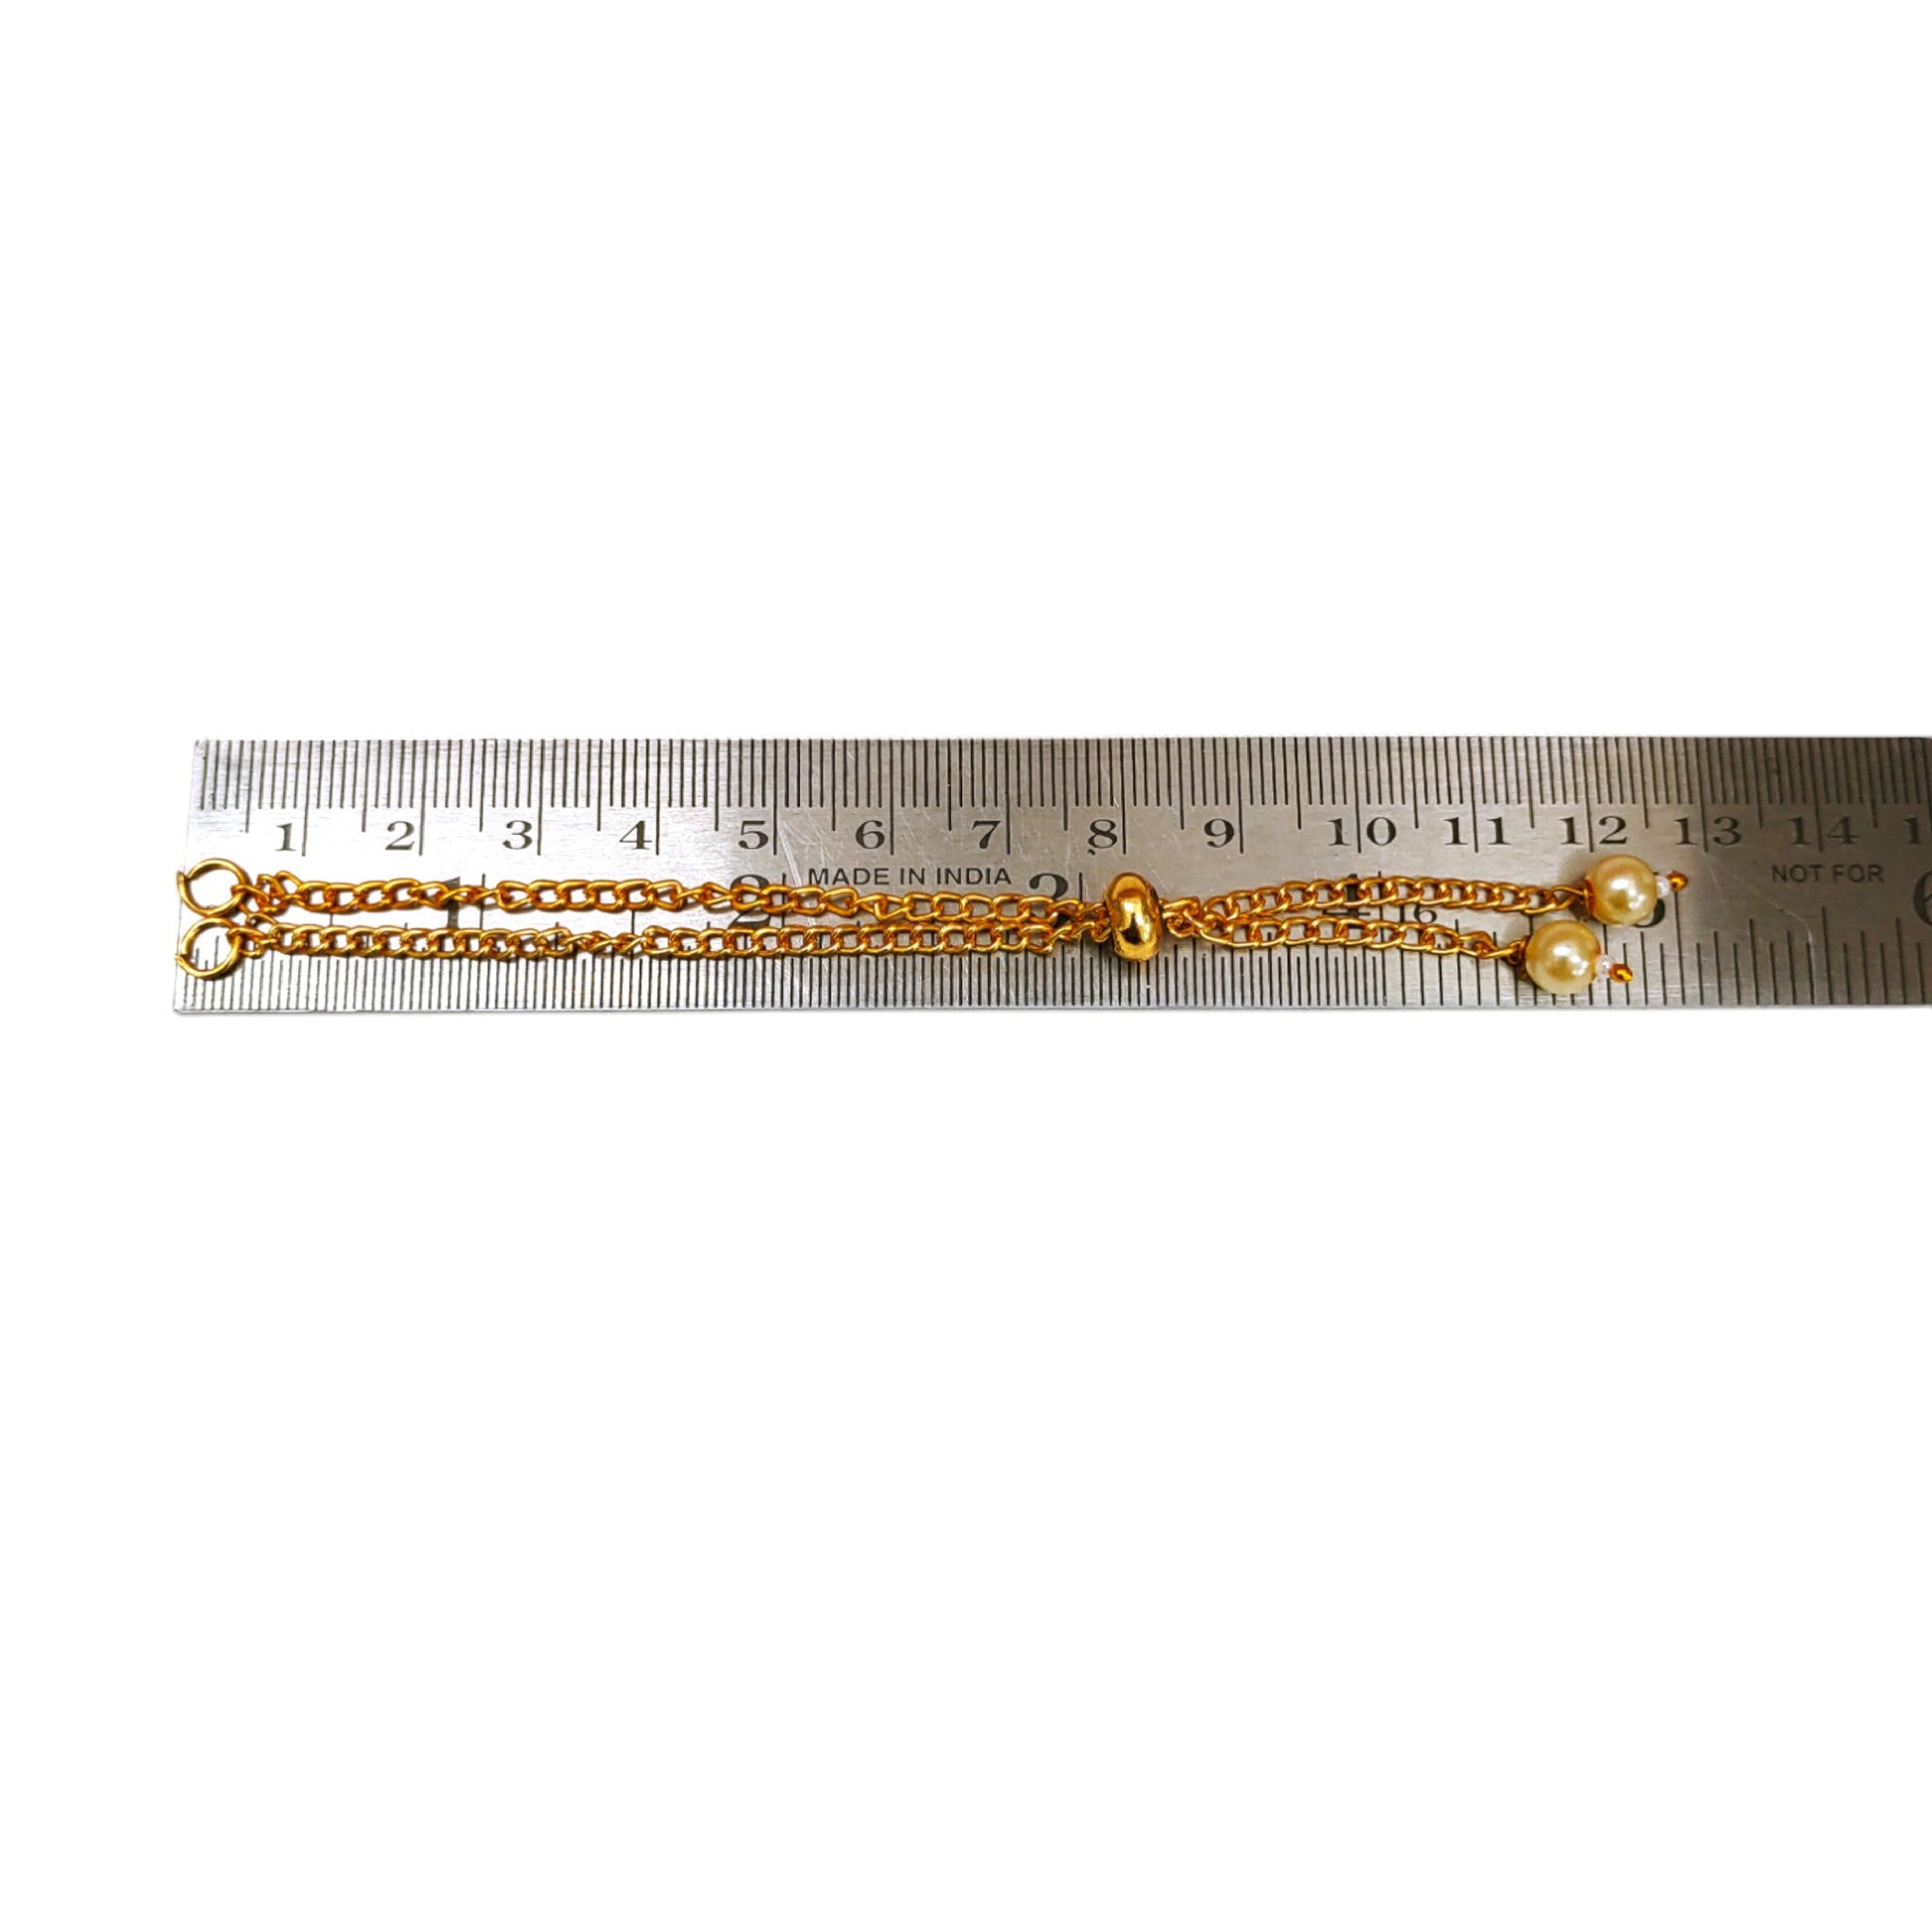 Beaded Goldern Bracelet Chain with Push Lock for Crafting or Decoration, Jewellery Making, Golden